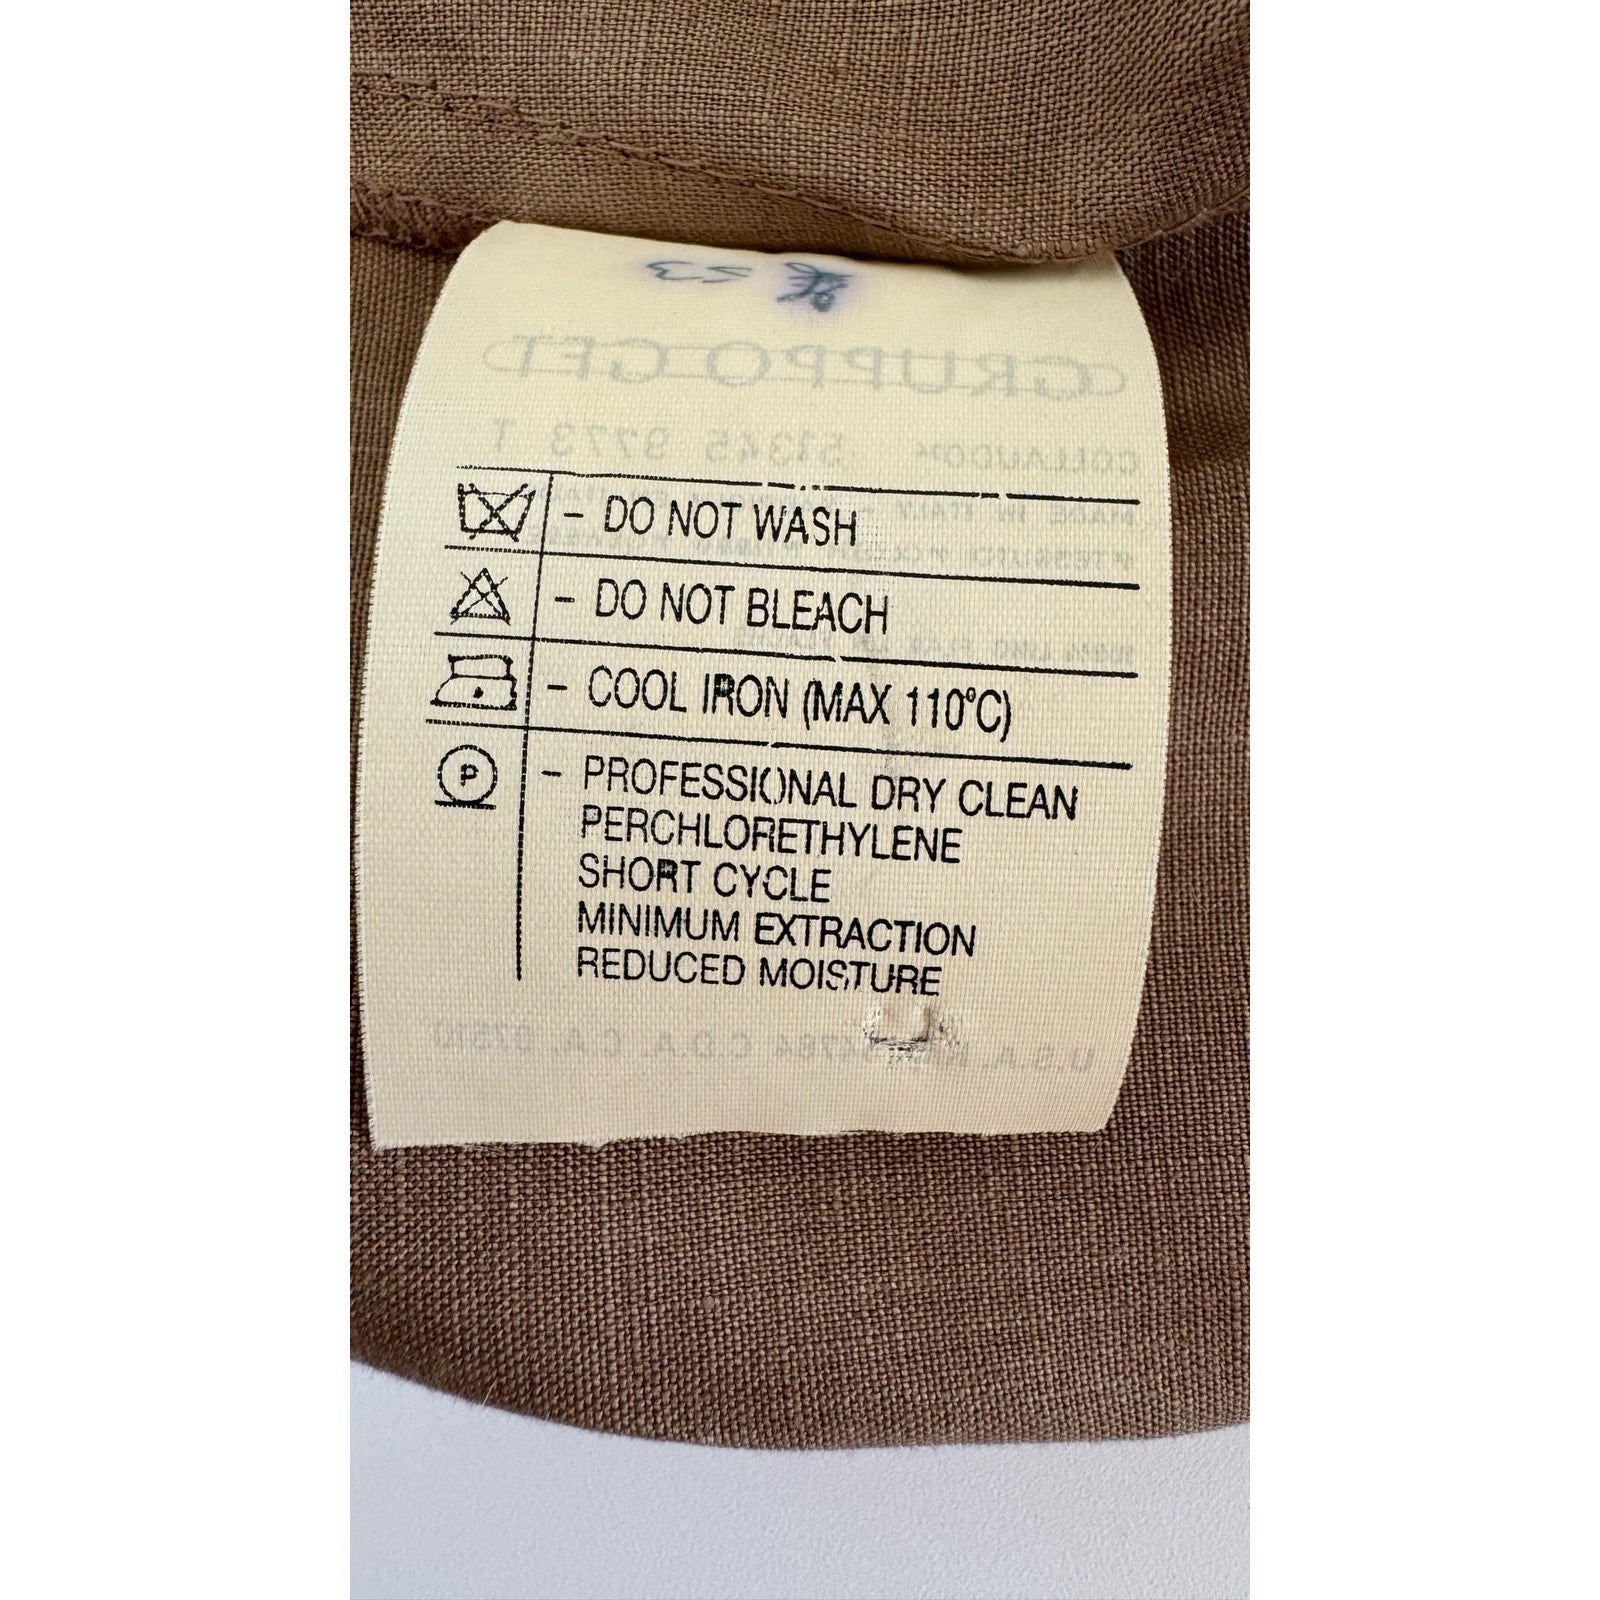 Close-up image of a clothing care label on a Valentino Miss V Linen Tank Top. Instructions: Do not wash, do not bleach, cool iron (max 110°C), professional dry clean with perchloroethylene, short cycle, minimum extraction, reduced moisture. The label is on a brown 100% linen fabric.